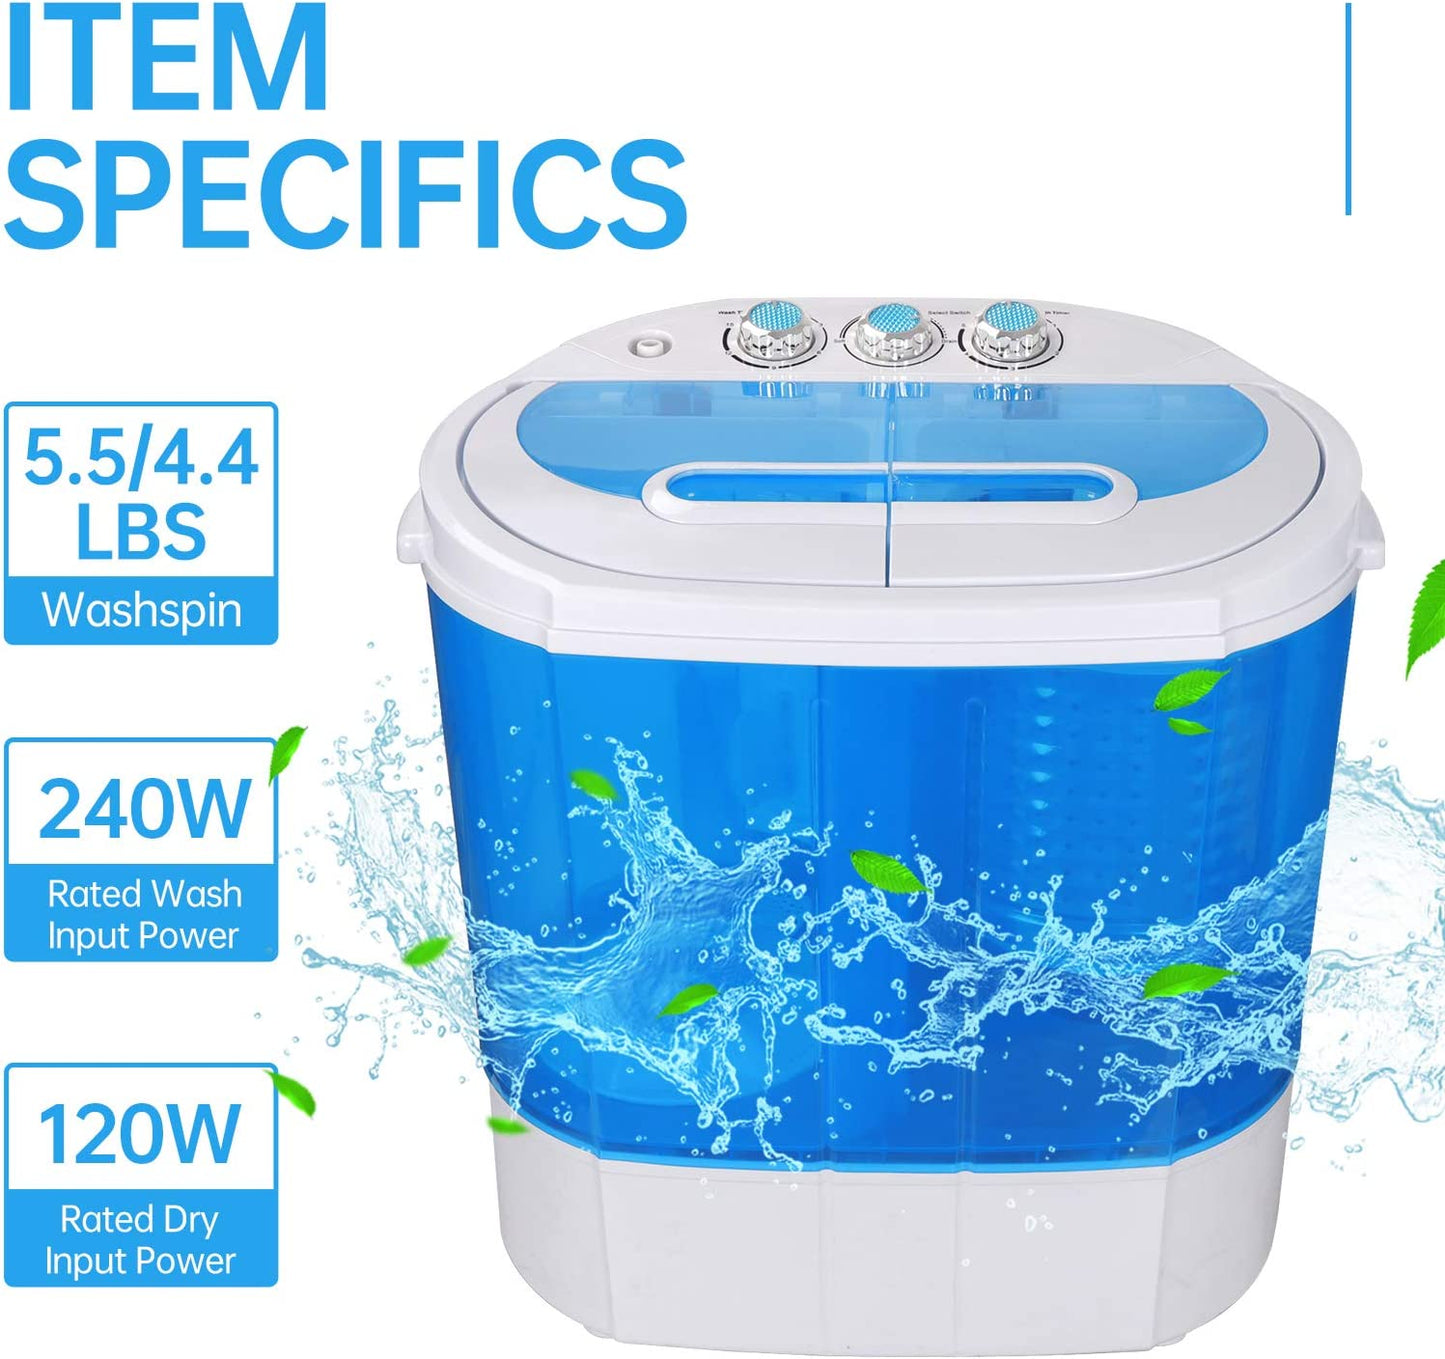 Portable Clothes Washing Machine Mini Twin Tub Small Laundry Washer Aparment Spin Dryer 9.9lbs Capacity Lightweight for Dormitory, RV